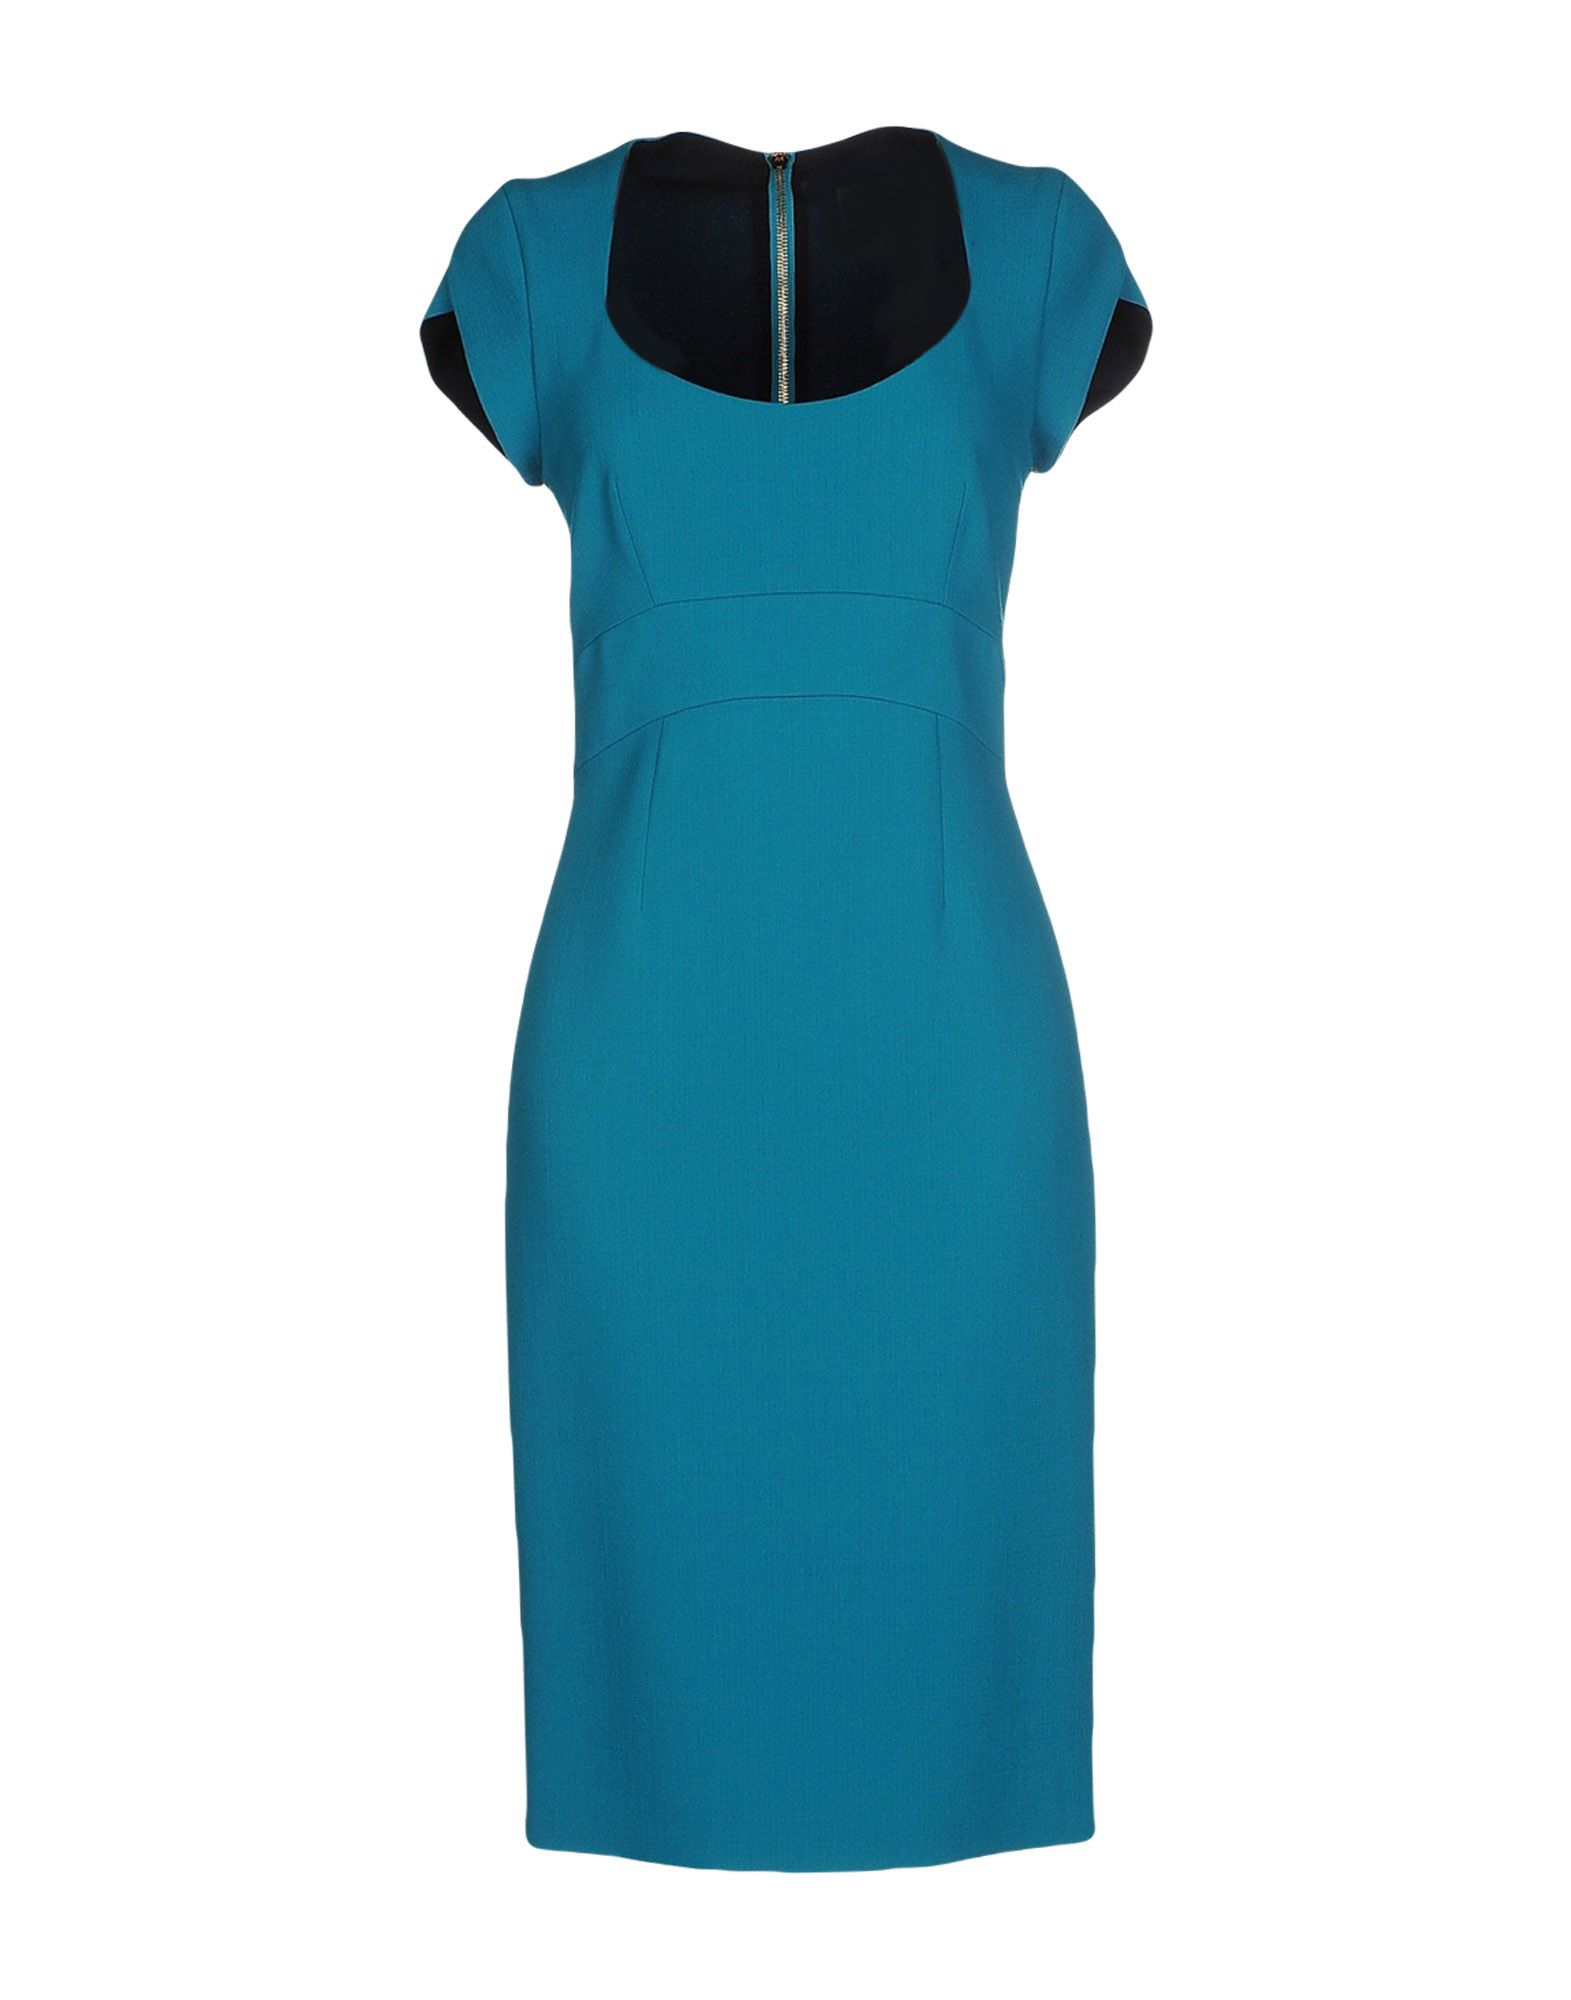 Lyst - Emilio Pucci Knee-length Dress in Blue